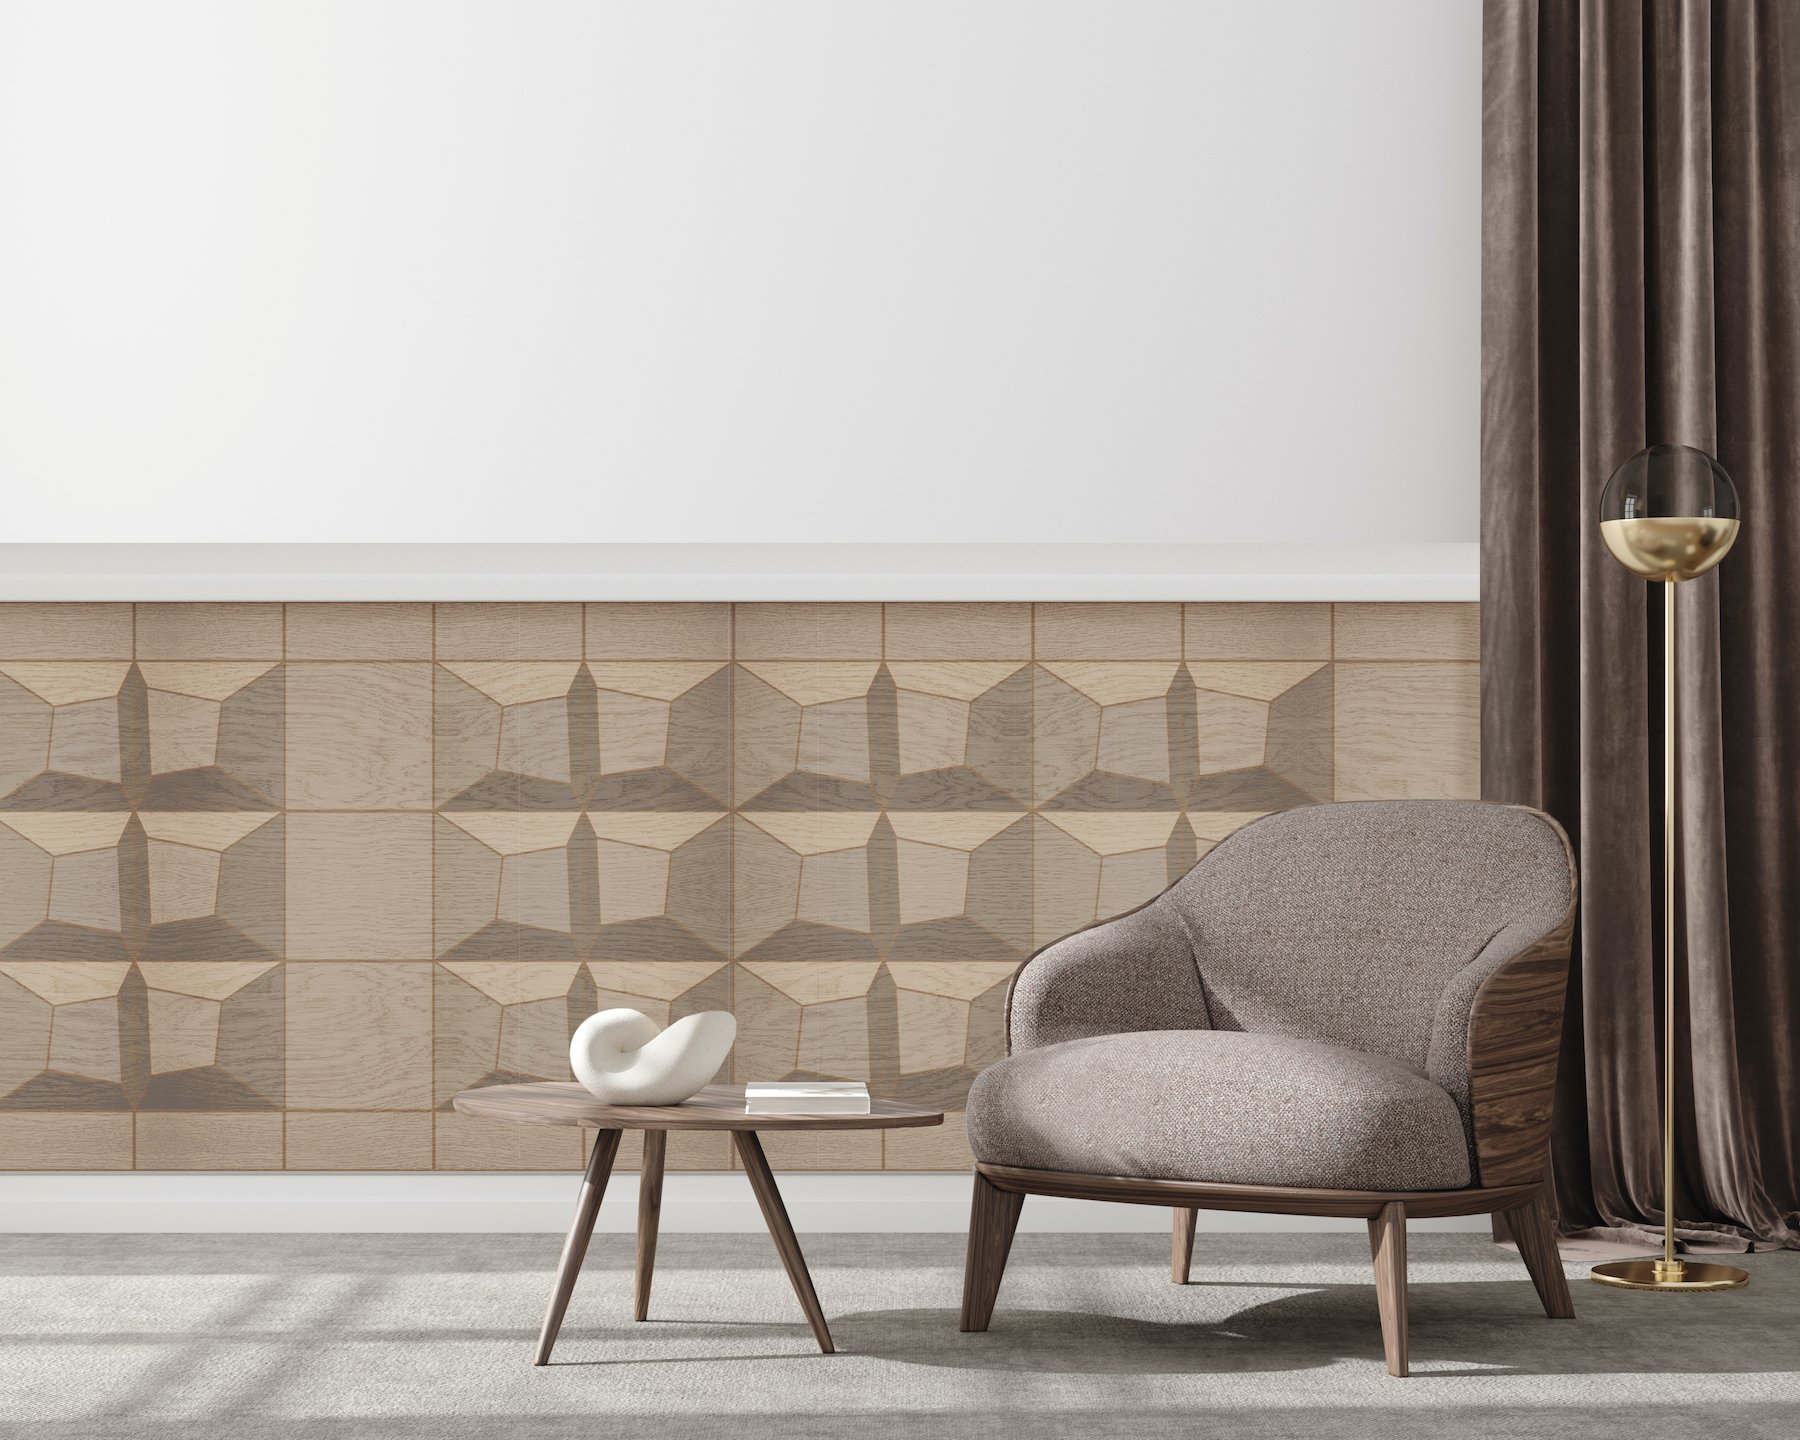 Pillow 3D Wall Panels (EDGE Series) and Square 2D Wall Panels (FLAT Series) in 'Natural' on Oak